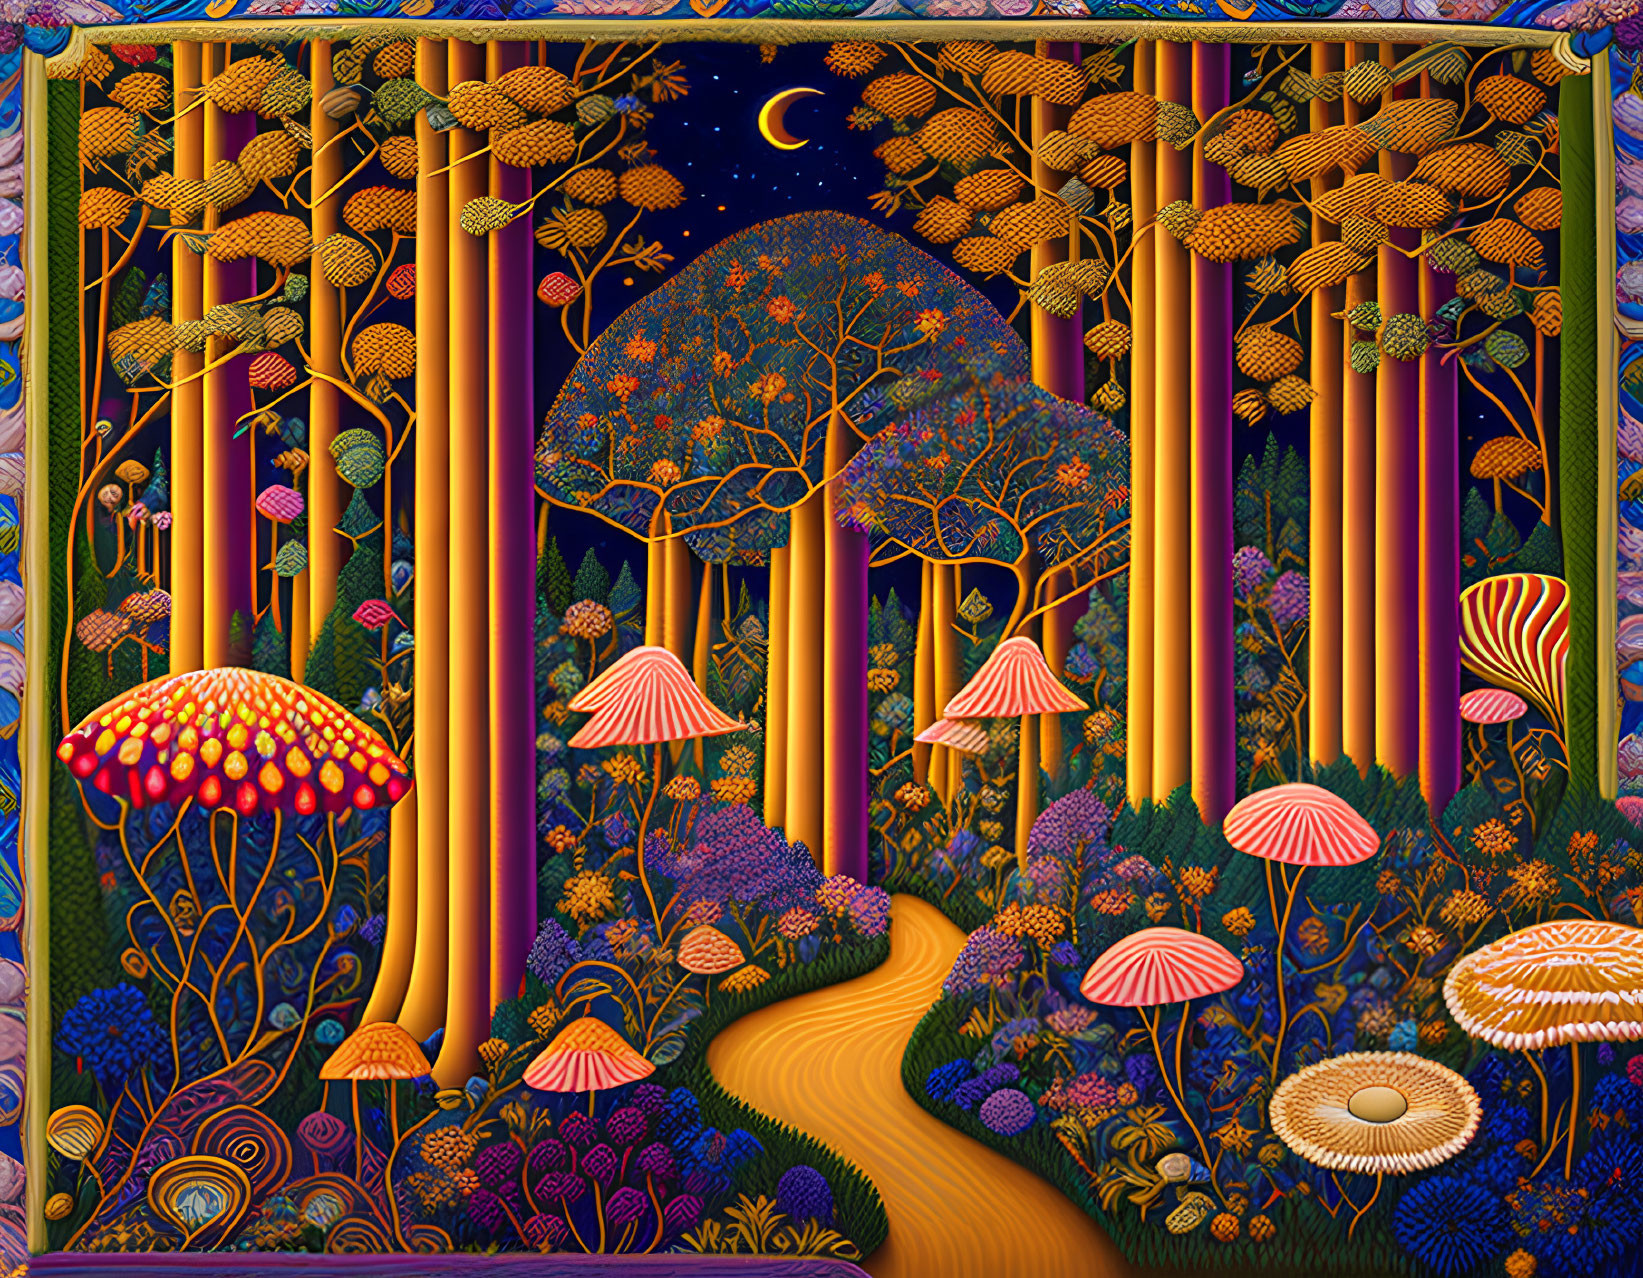 Colorful Golden and Blue Trees in Whimsical Forest Scene